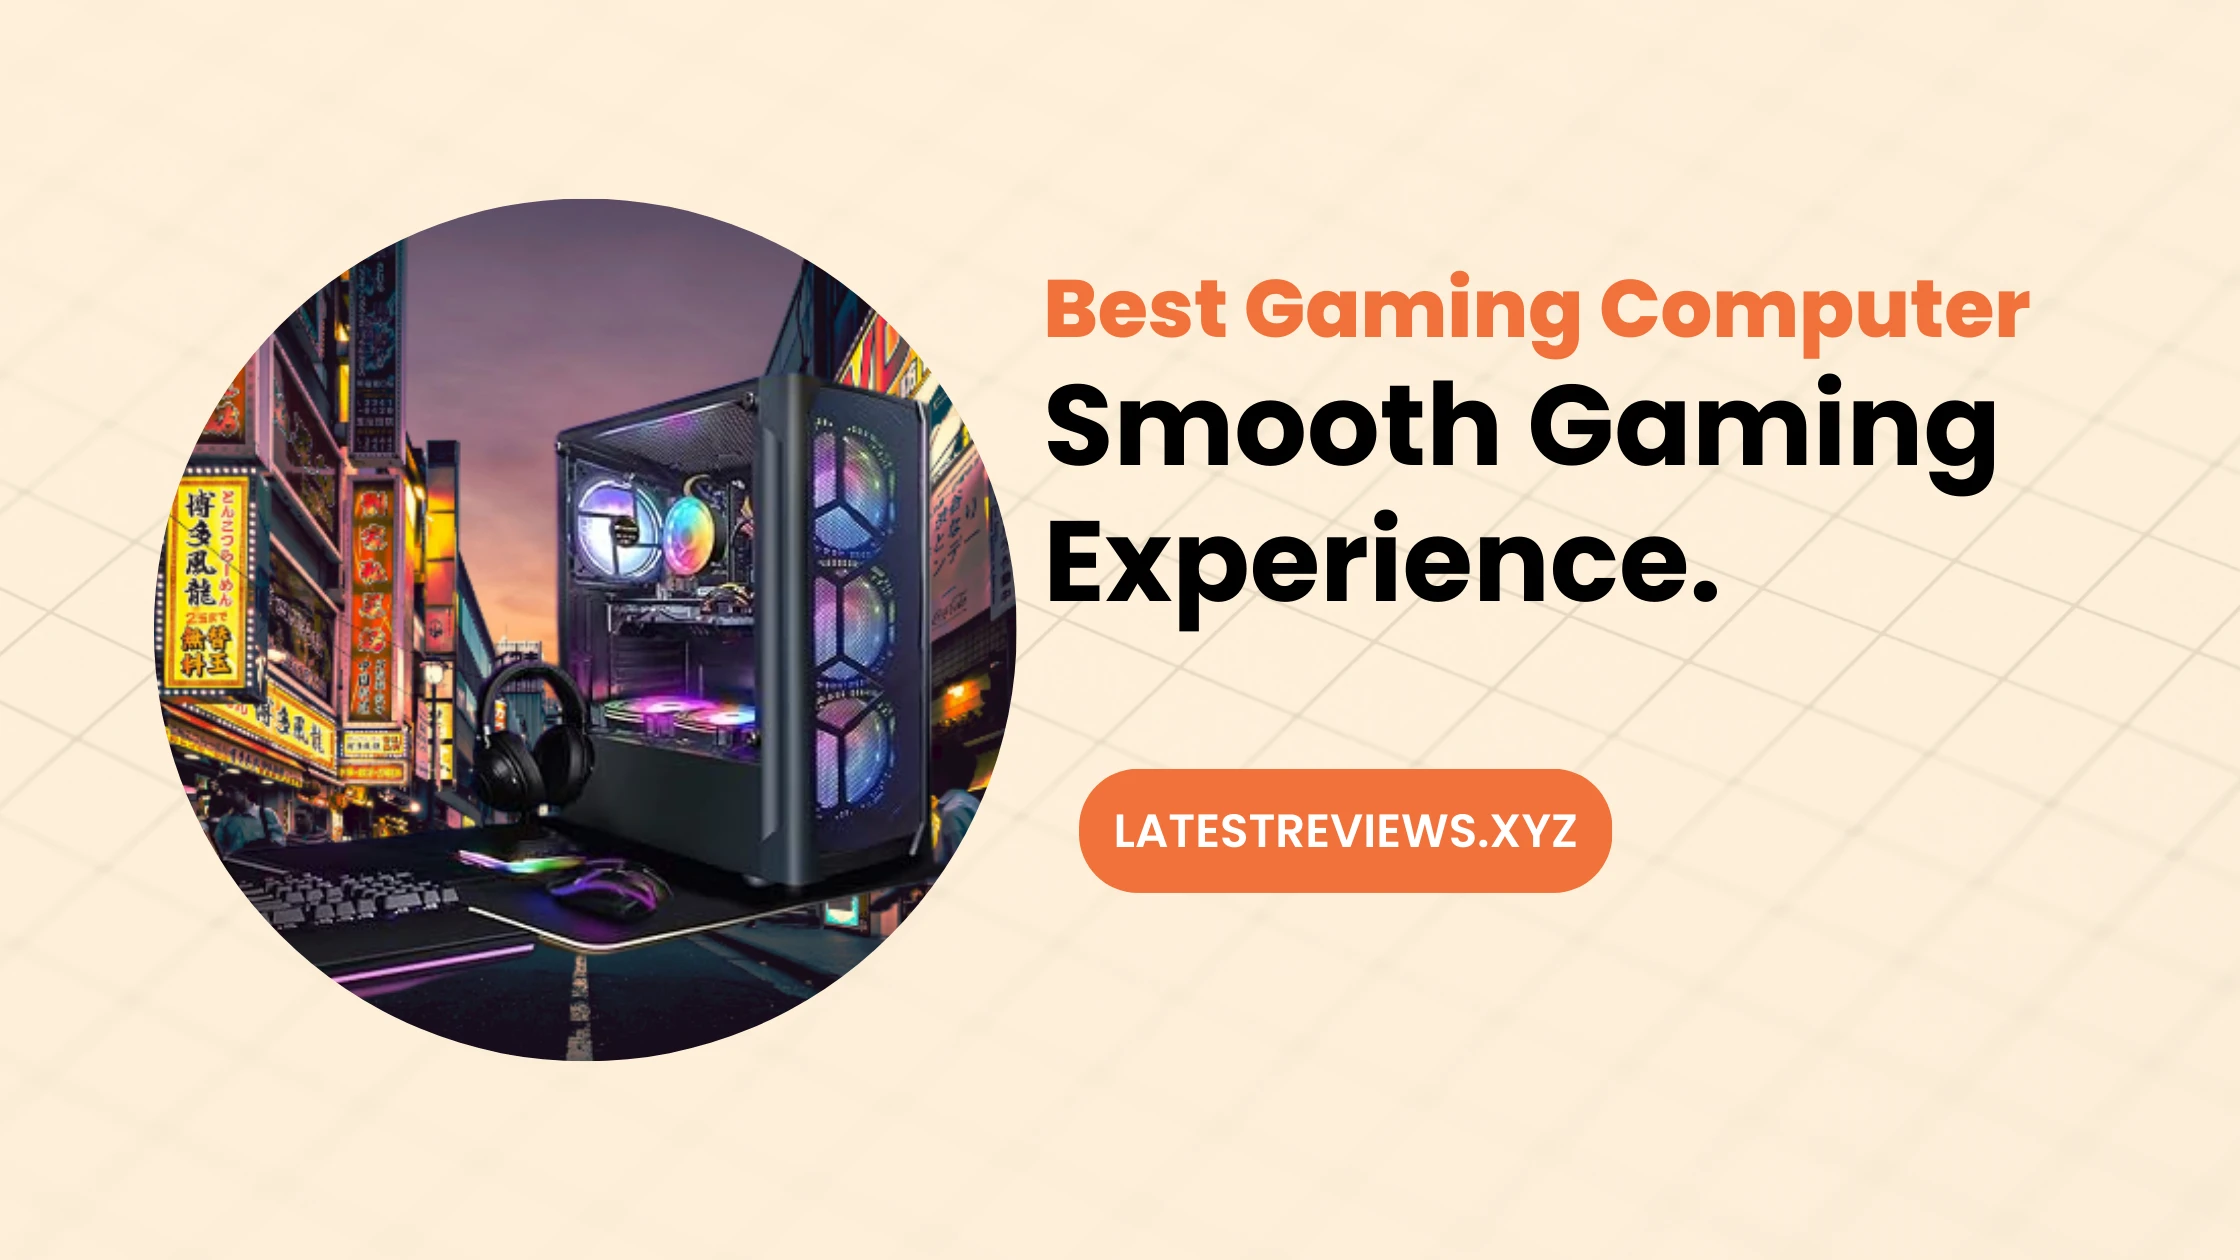 The epitome of gaming excellence, this computer boasts superior hardware and innovative features, ensuring an unparalleled gaming experience.